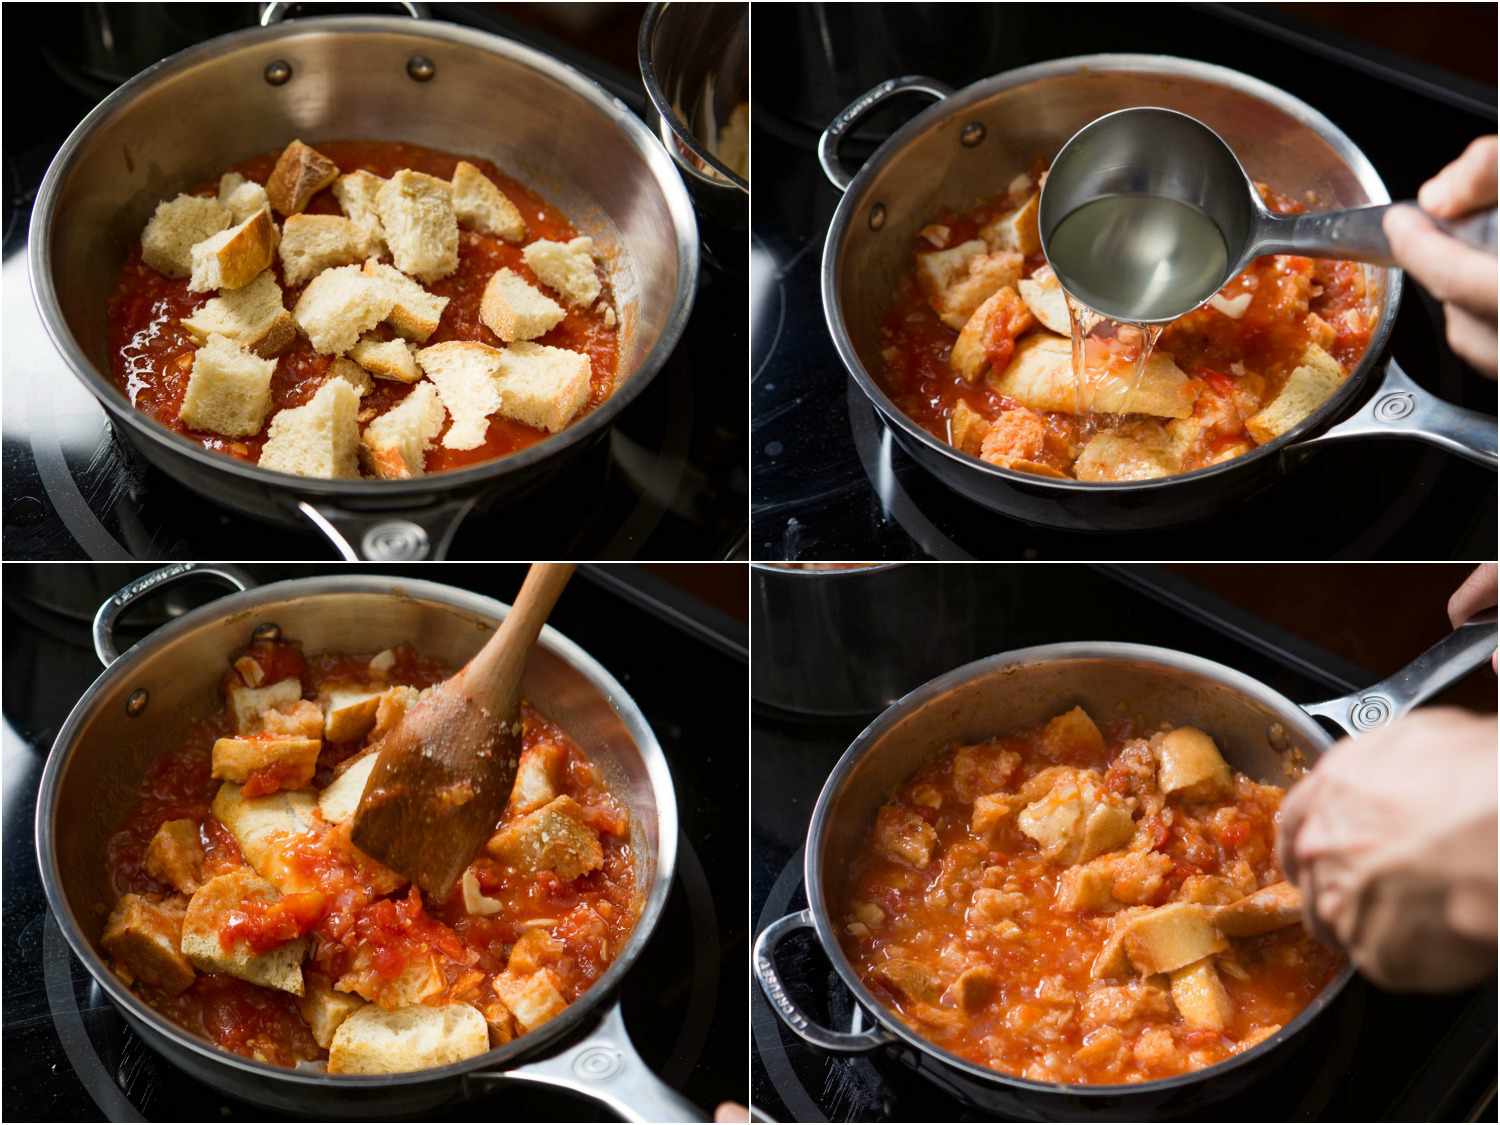 Collage of bread being added to the tomato mixture along with vegetable stock. The bread is stirred in and broken up slightly.